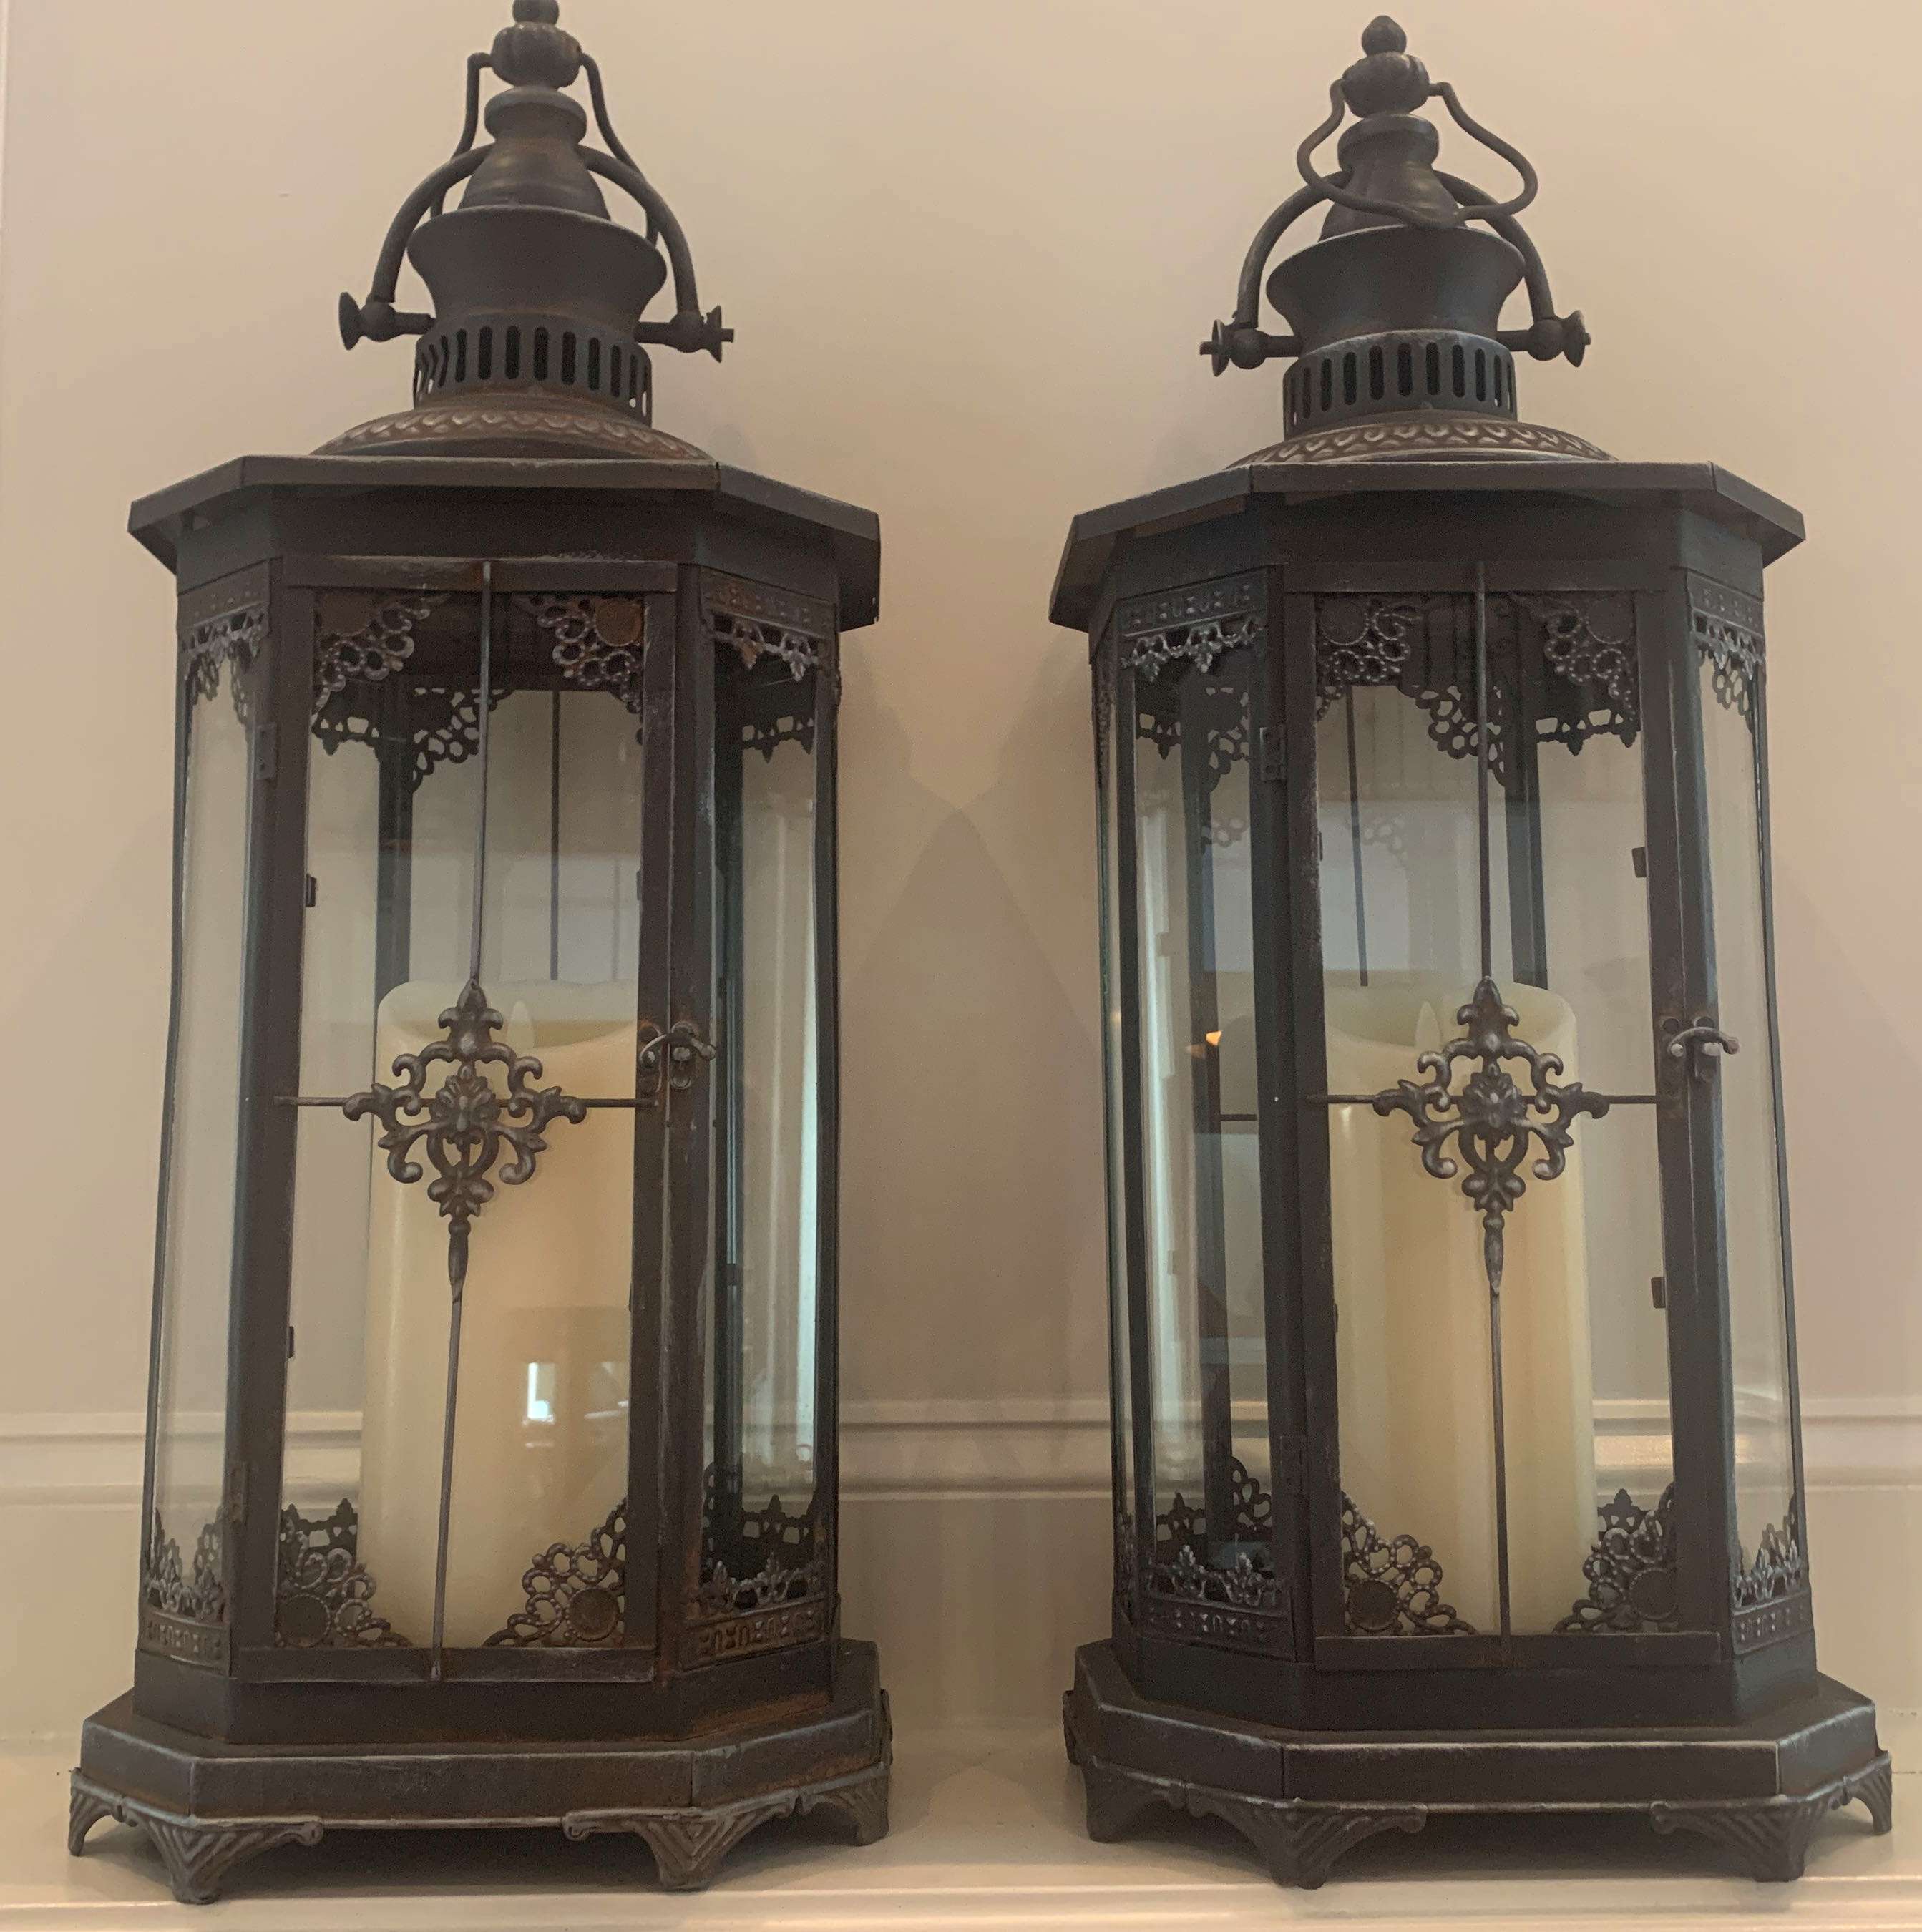 Set of 2 Matching Battery Operated Lanterns. 8B - Lil Dusty Online Auctions  - All Estate Services, LLC